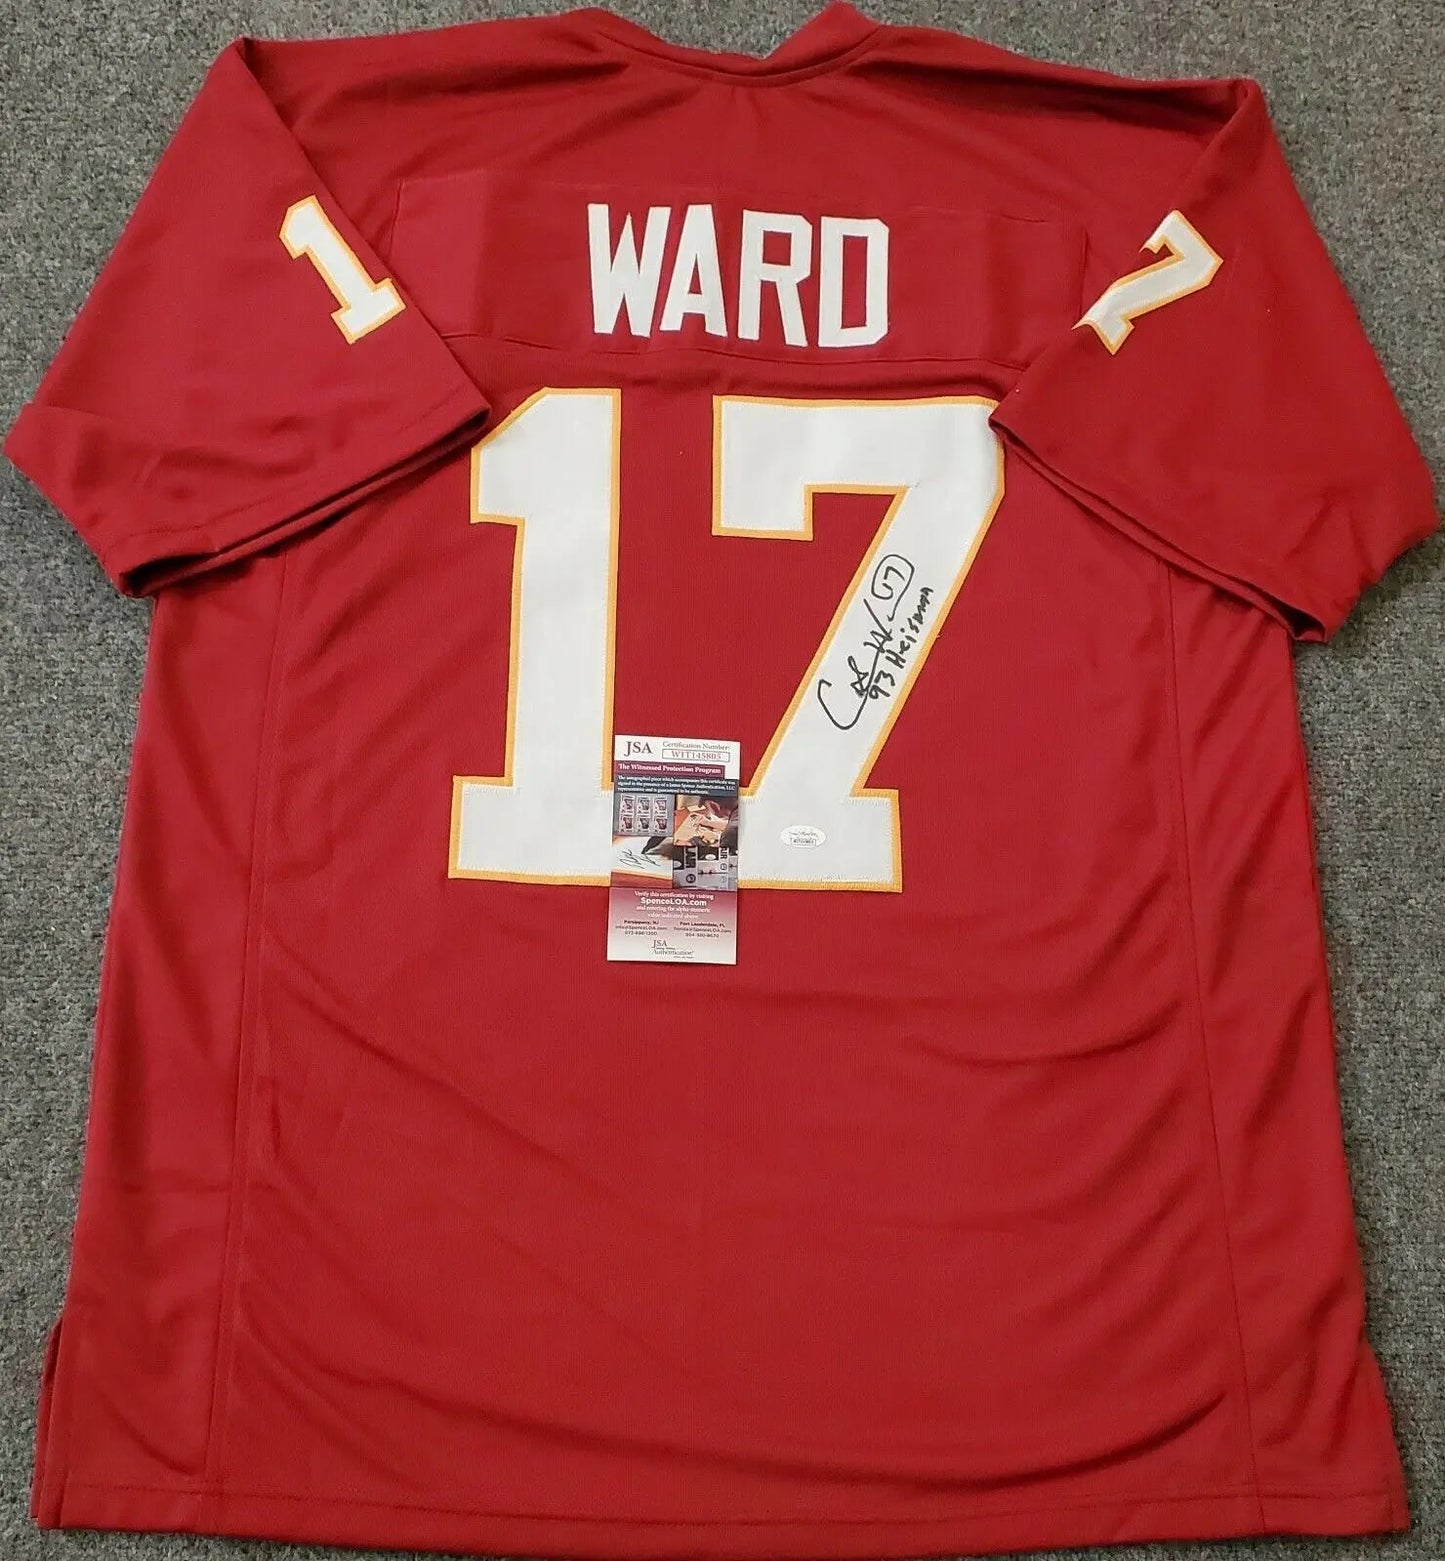 MVP Authentics Florida State Seminoles Charlie Ward Autographed Signed Inscribed Jersey Bas Coa 116.10 sports jersey framing , jersey framing